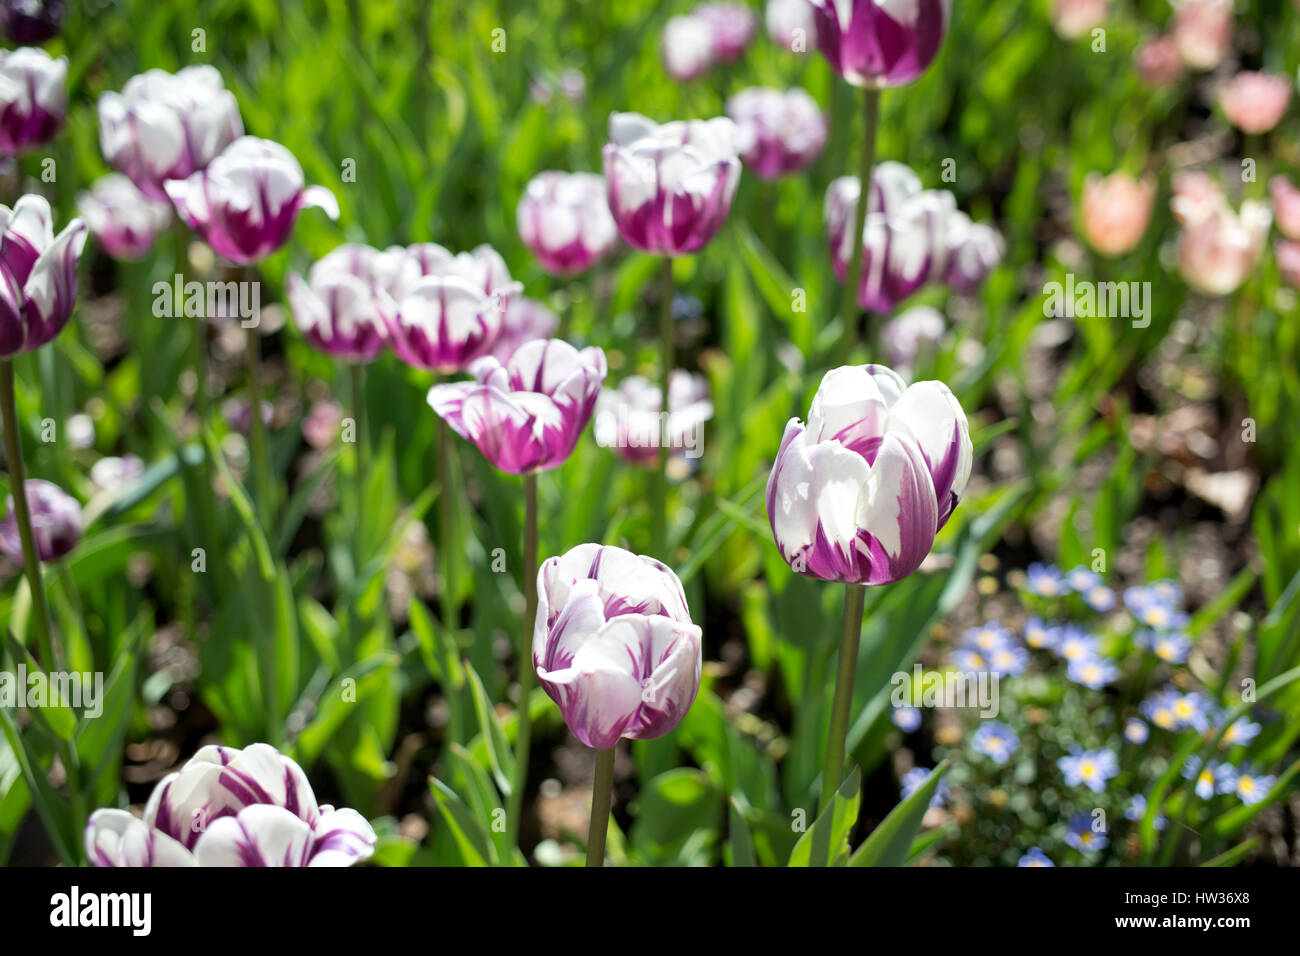 Purple and white variegated tulips Stock Photo